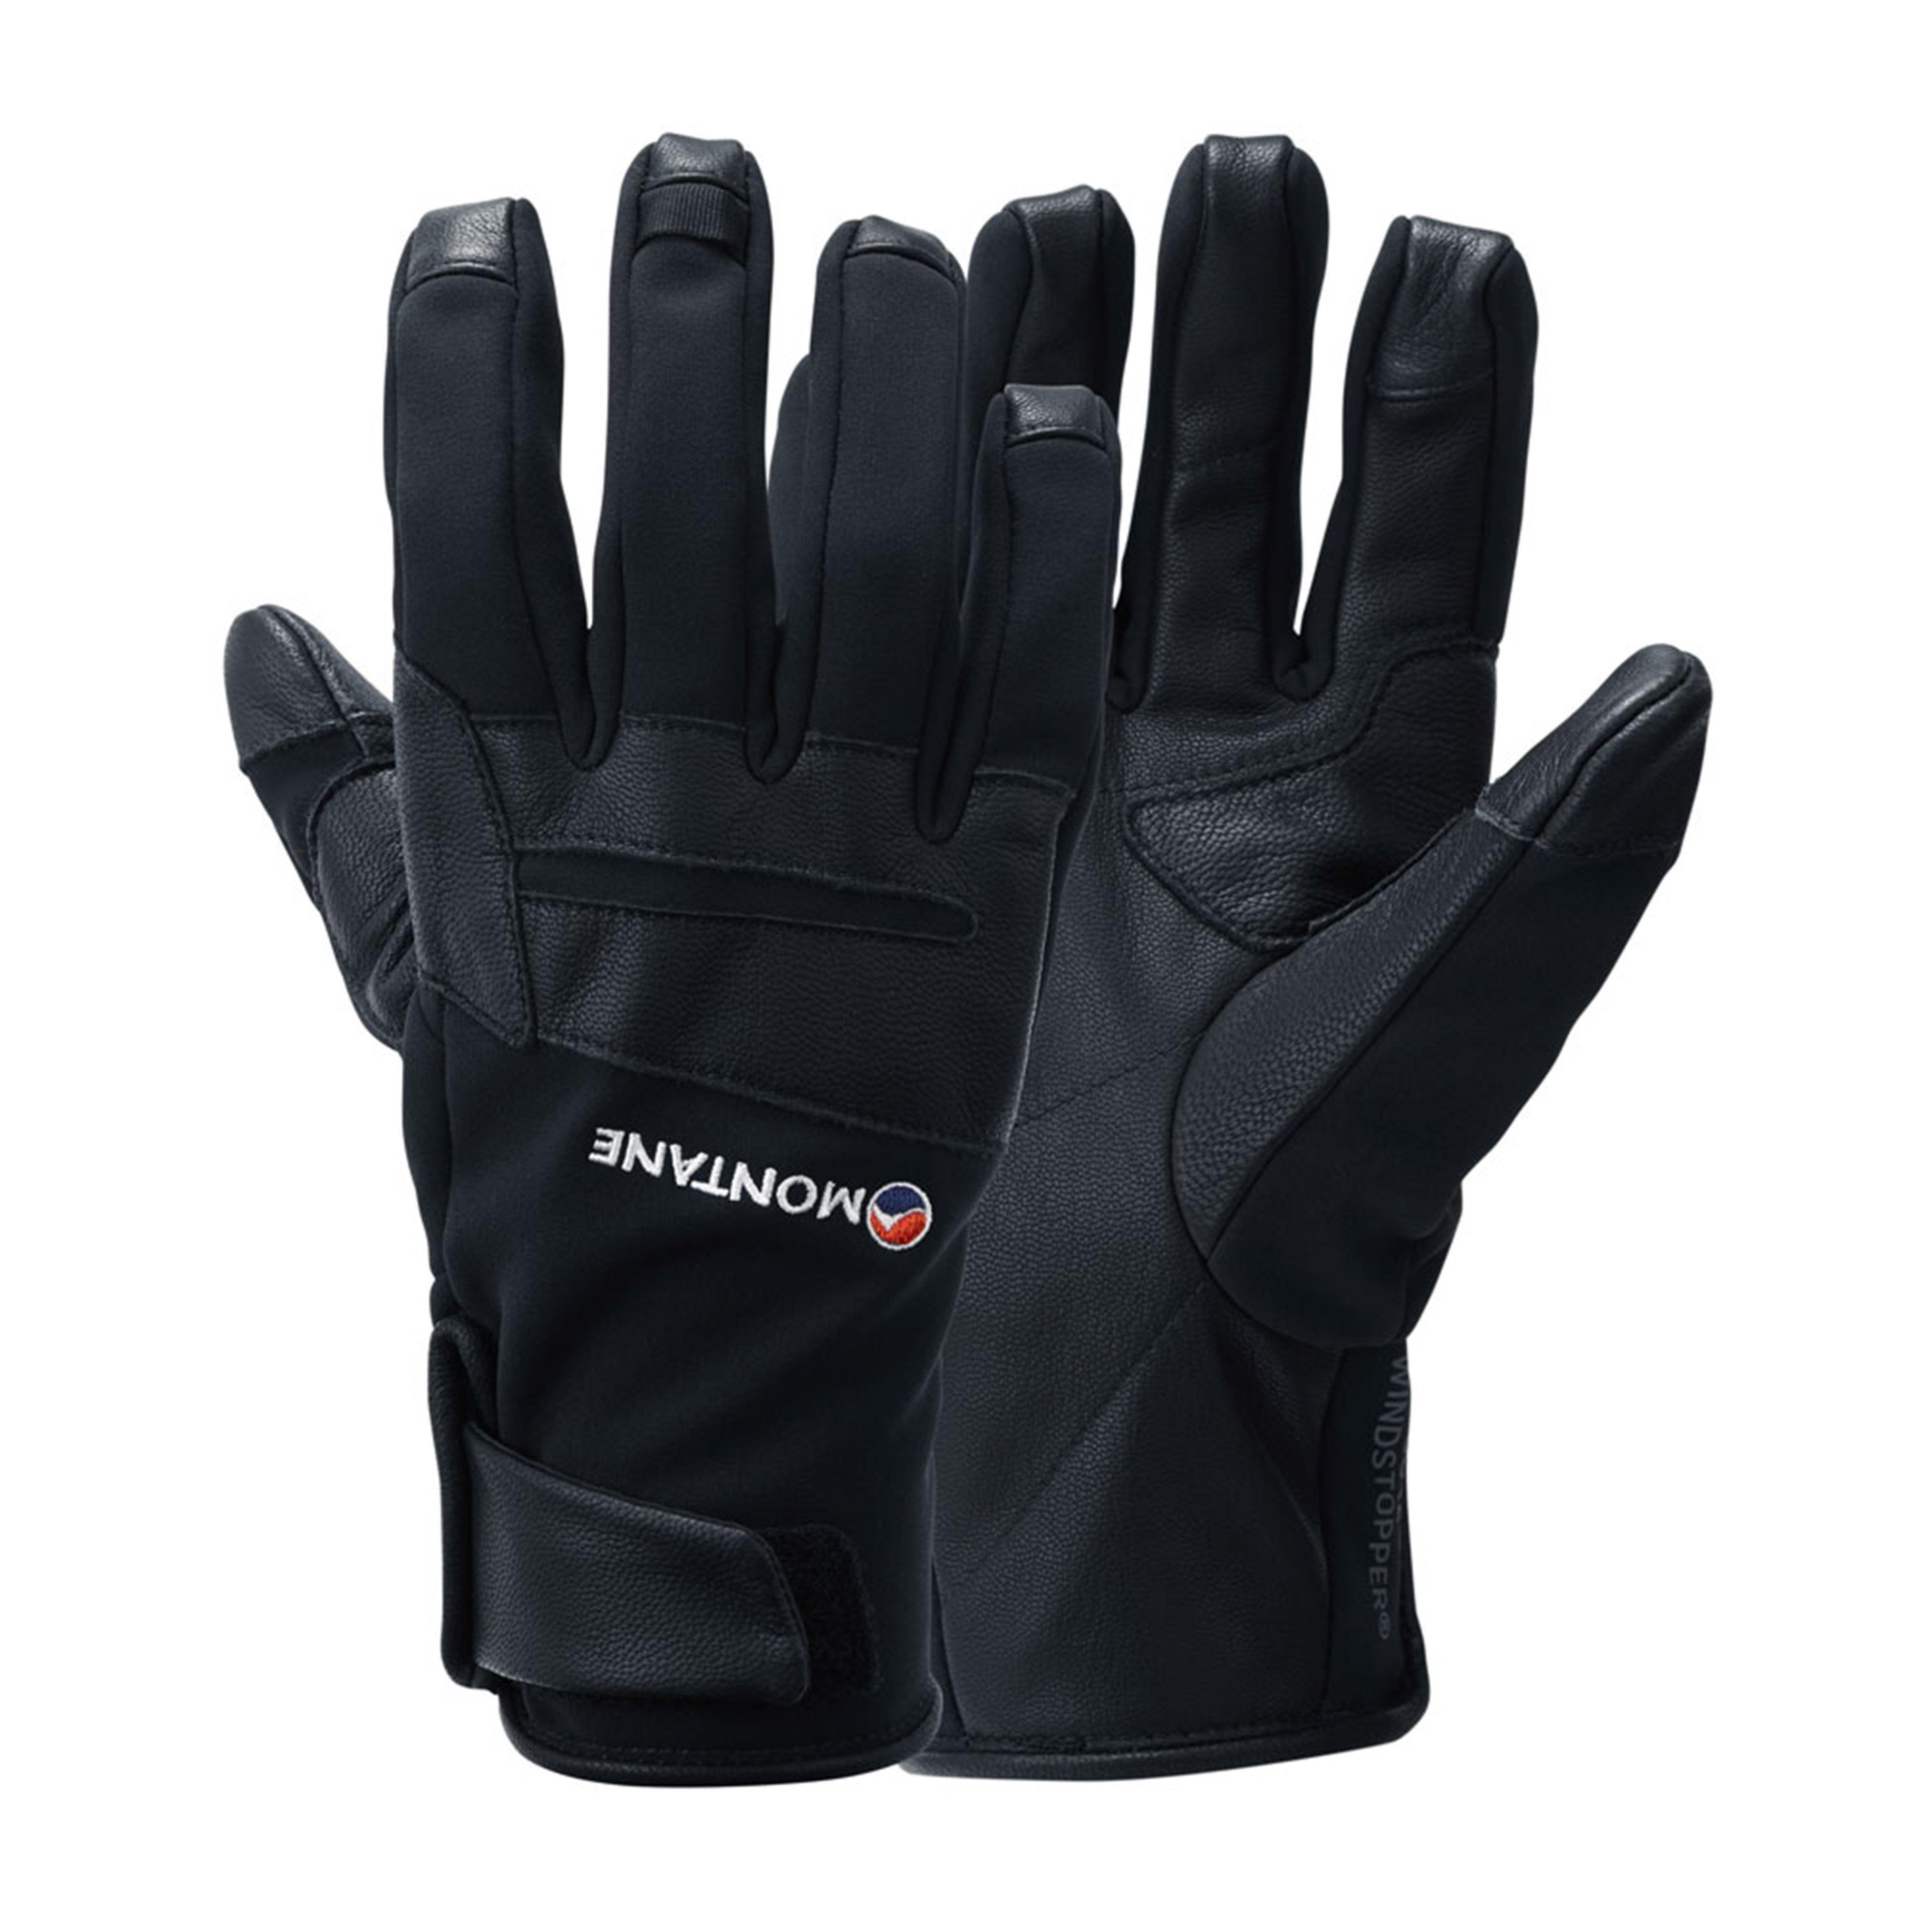 Montane Cyclone Windproof Gloves Review